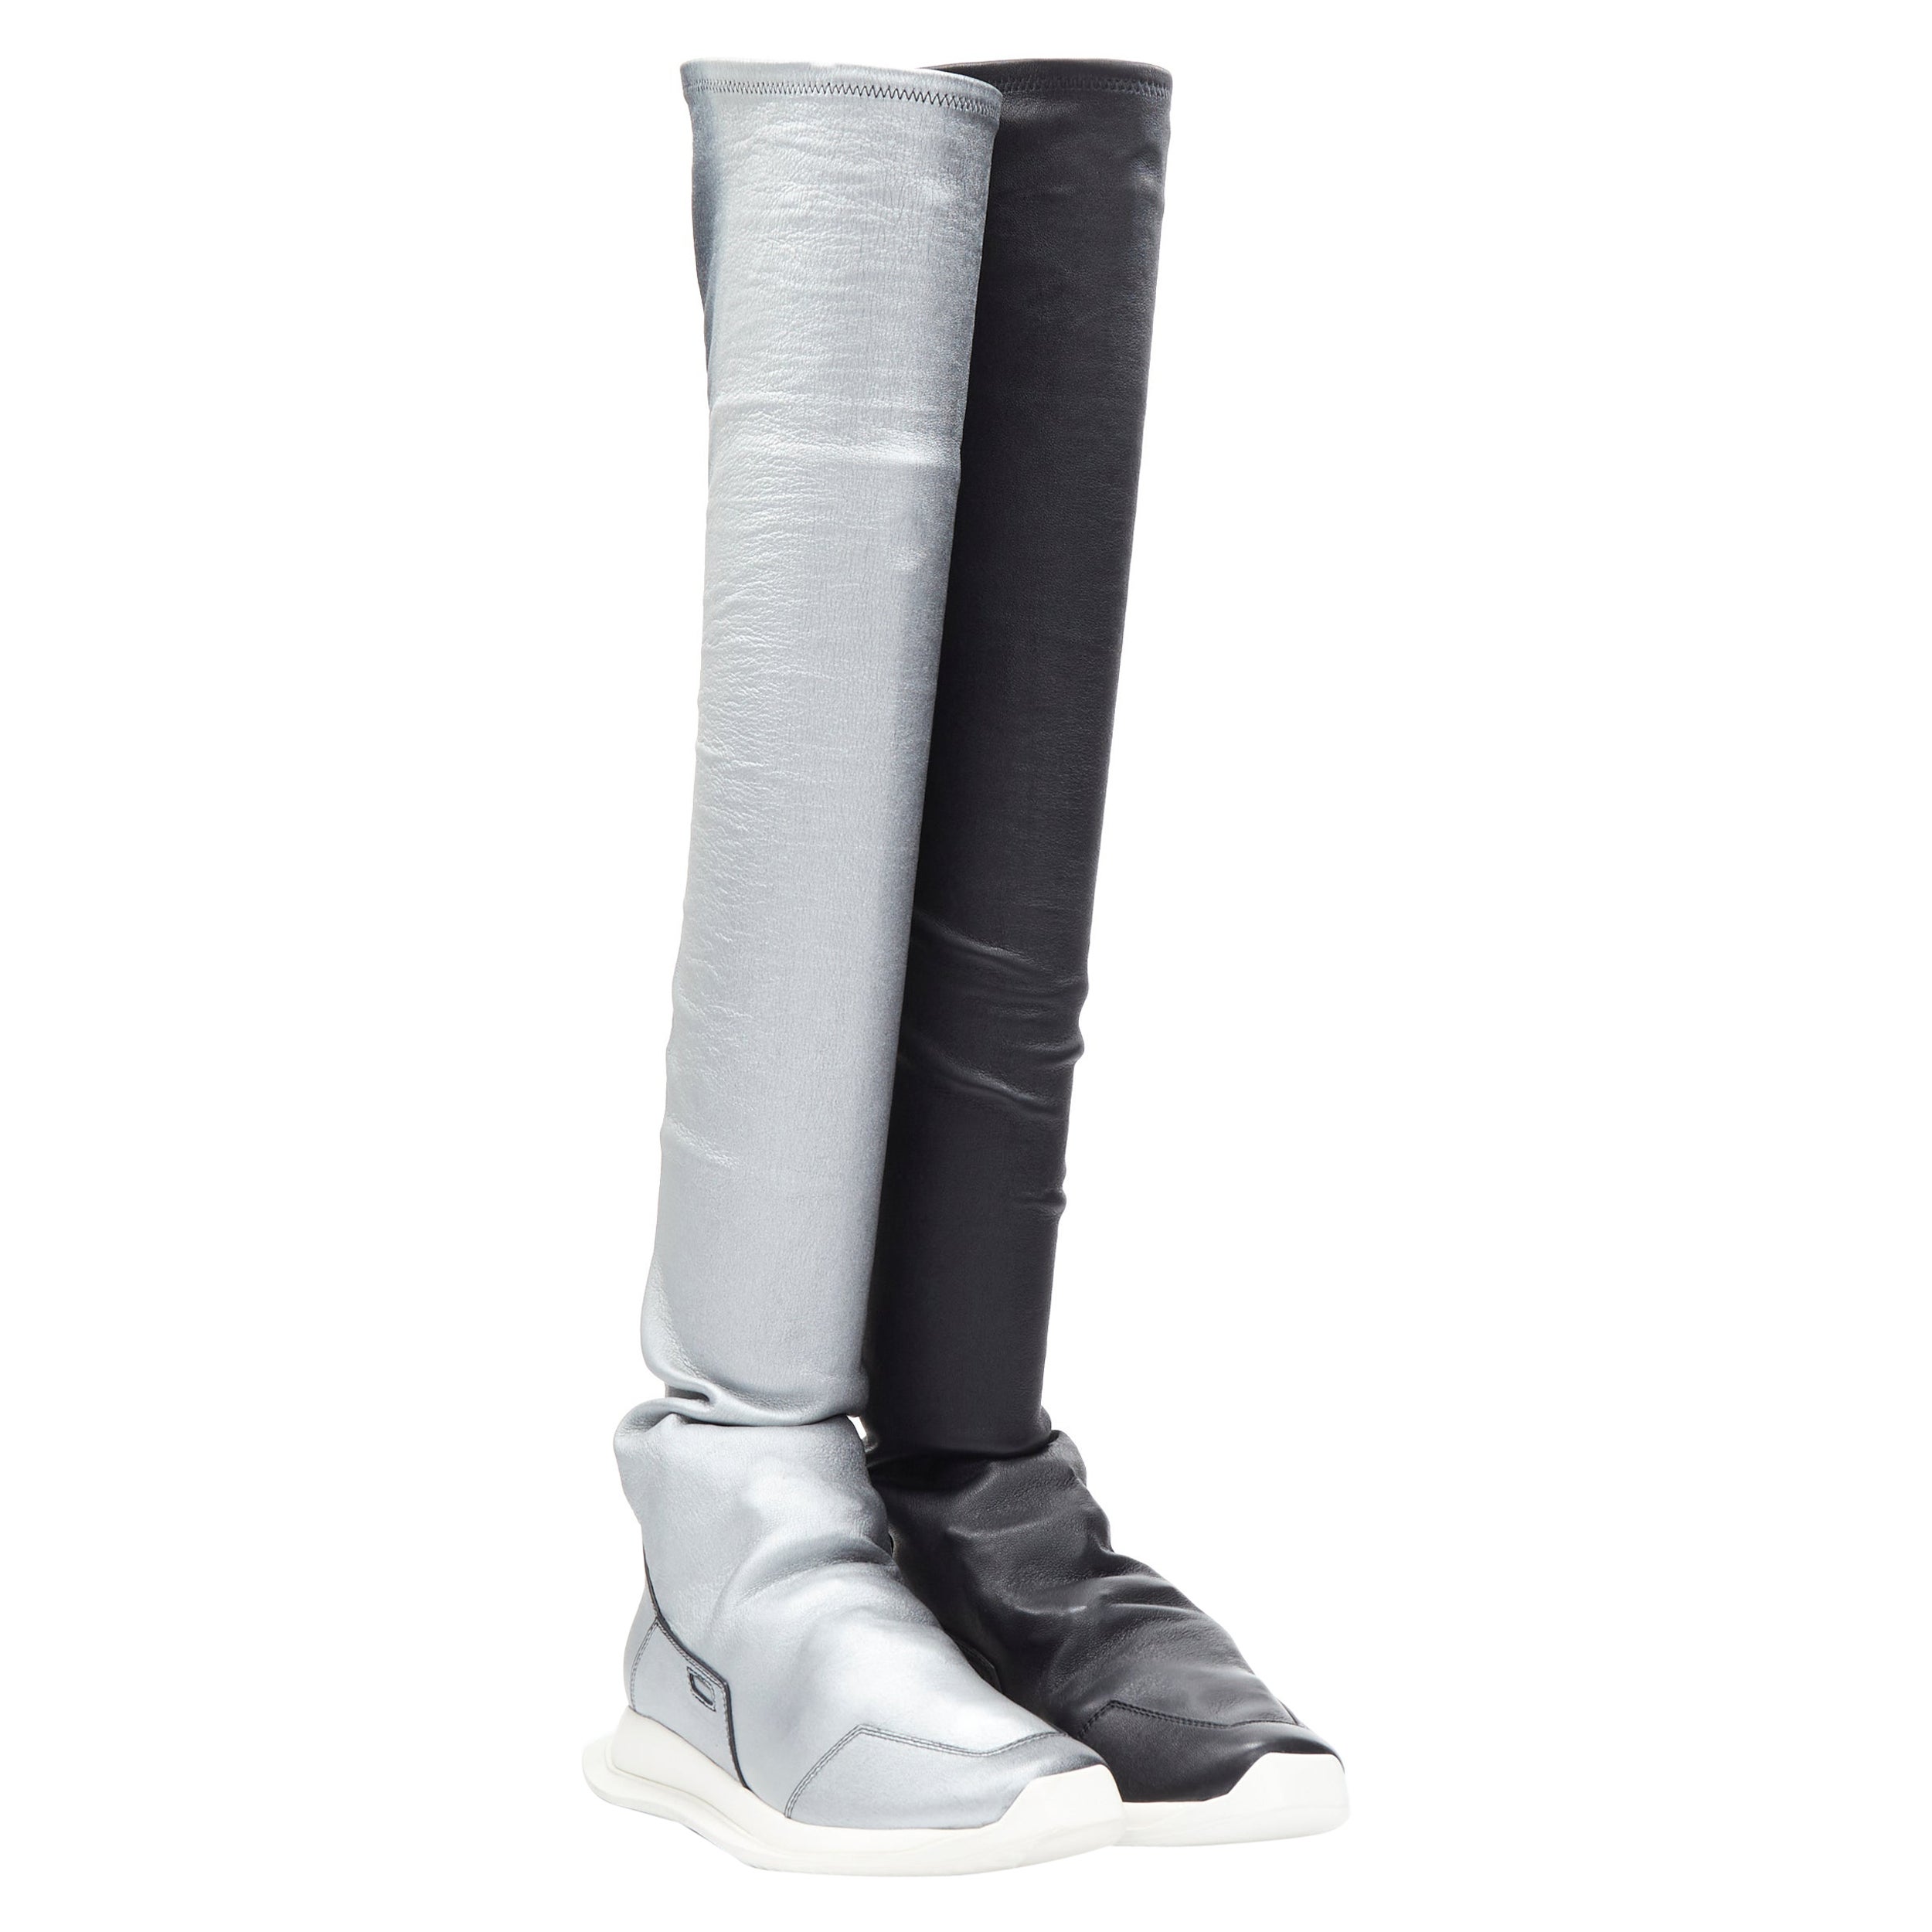 new RICK OWENS Runway New Runner Stretch silver black stocking boot sneaker EU36 For Sale